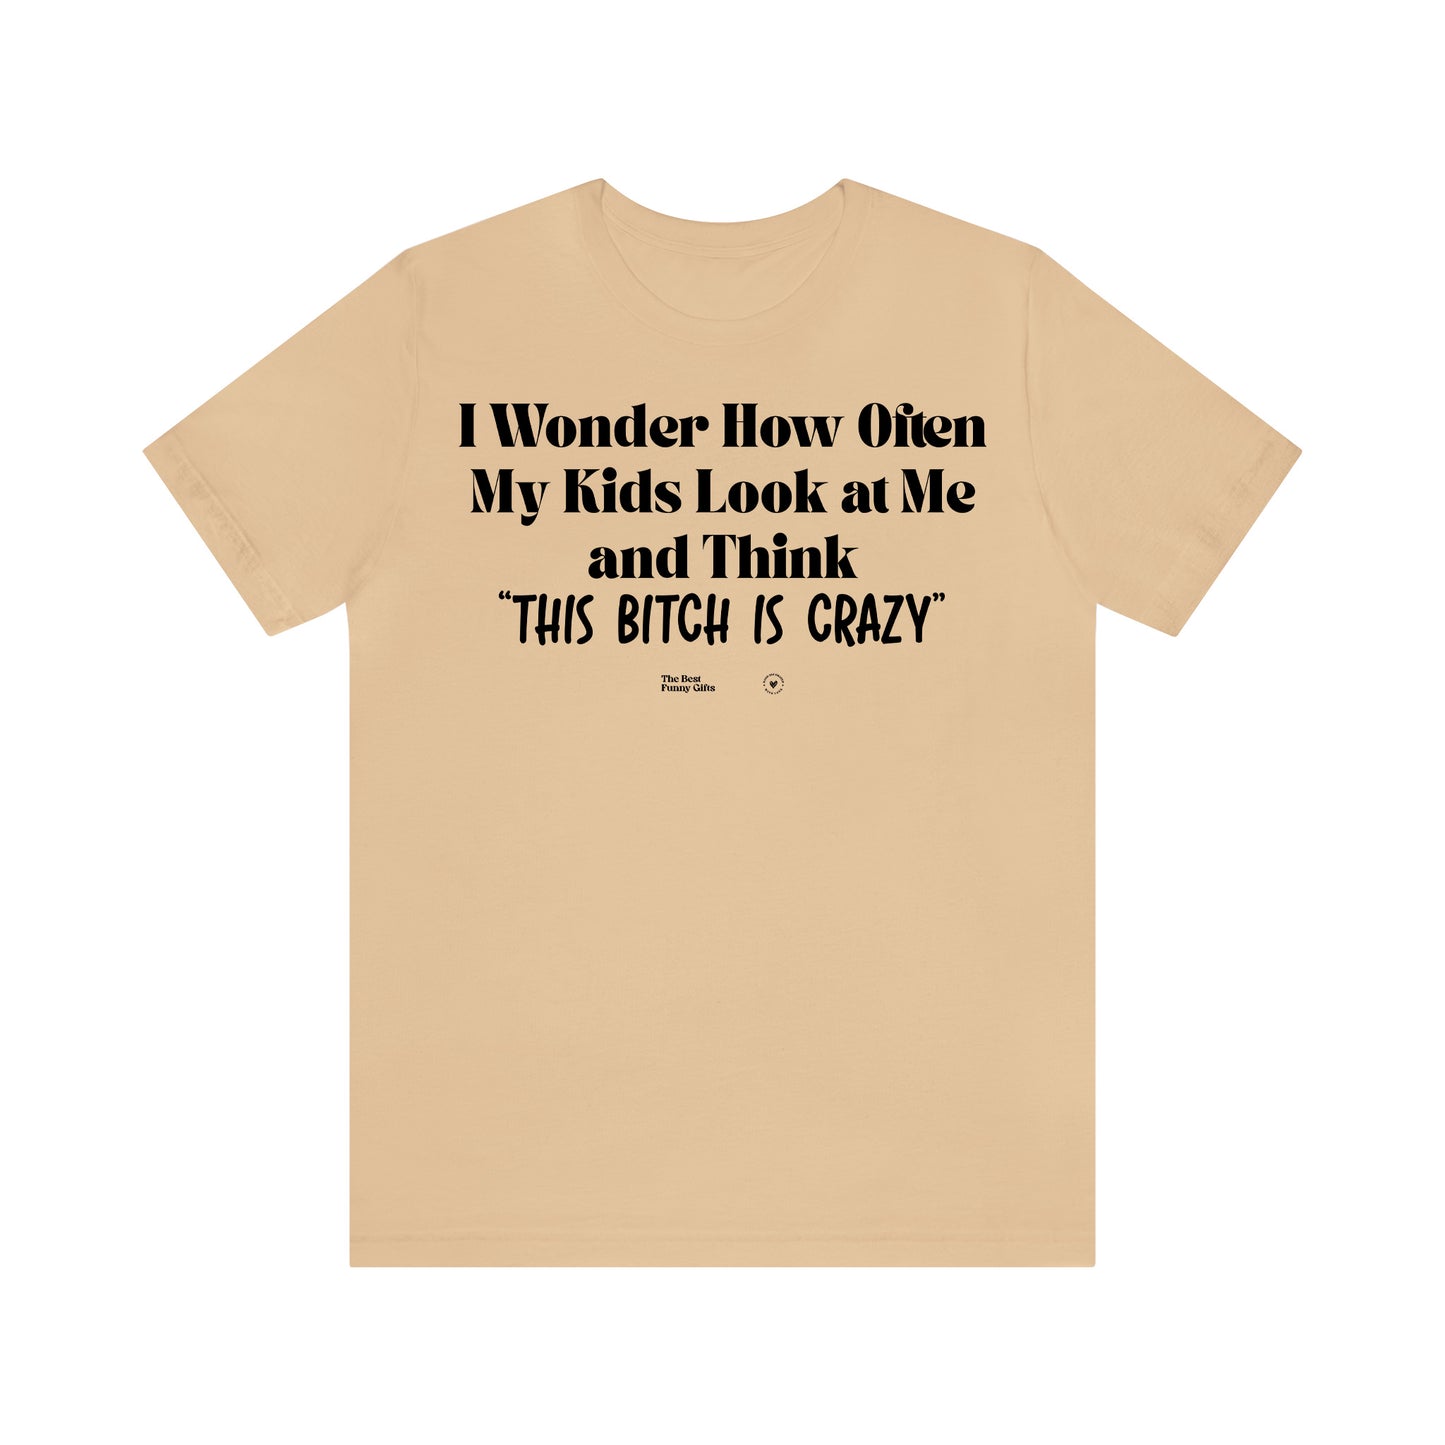 Funny Shirts for Women - I Wonder How Often My Kids Look at Me and Think "This Bitch is Crazy" - Women’s T Shirts